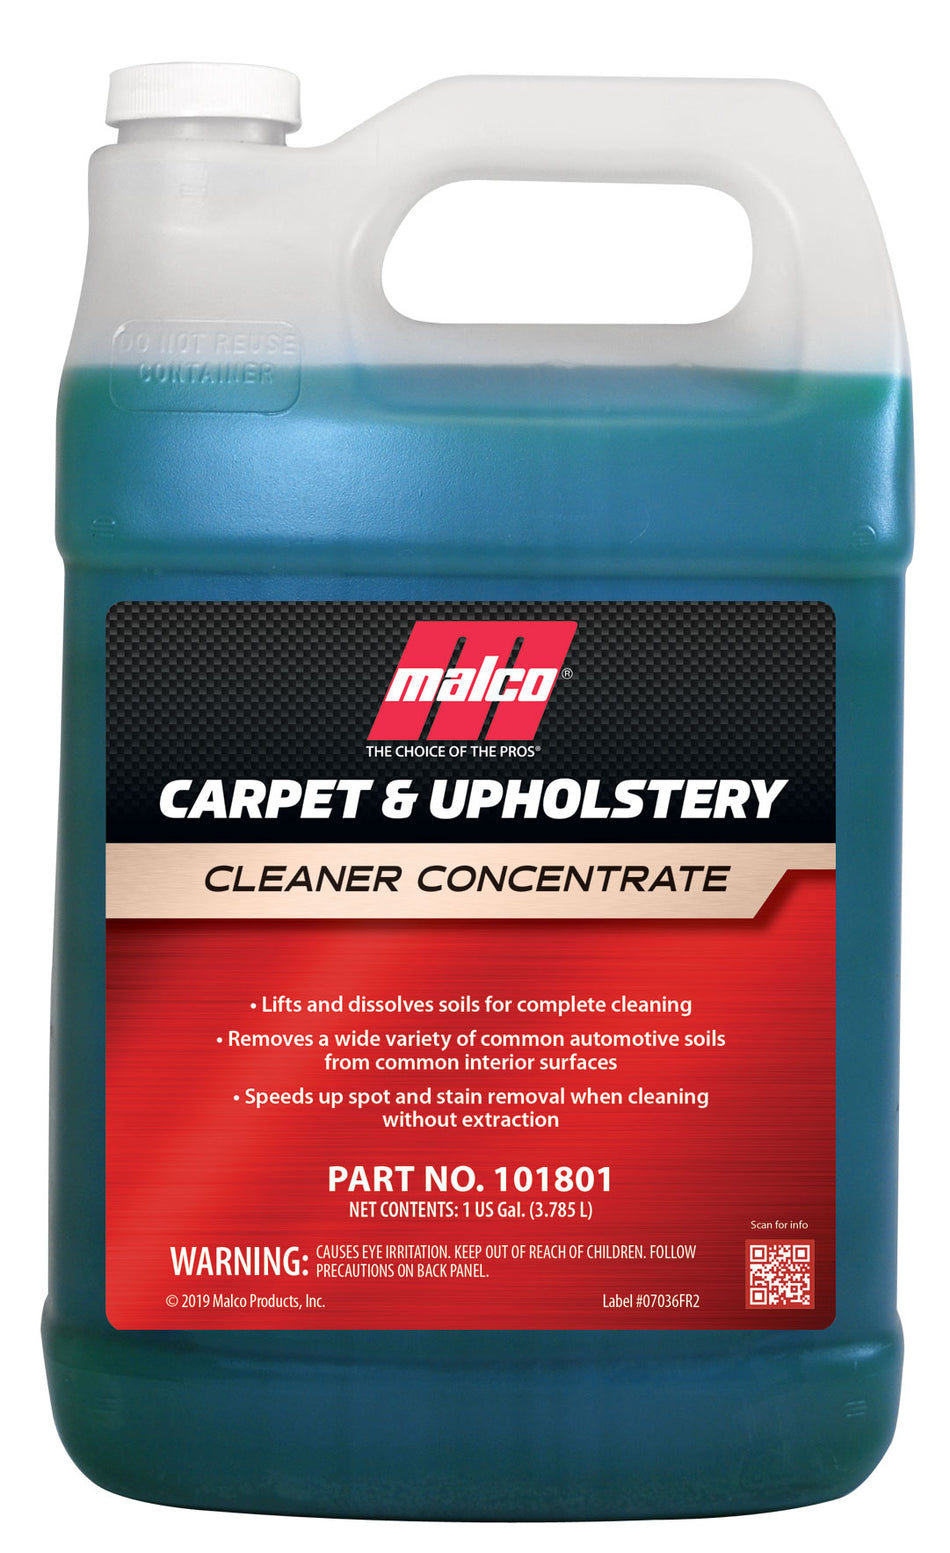 Malco Carpet and Upholstery Cleaner Concentrate